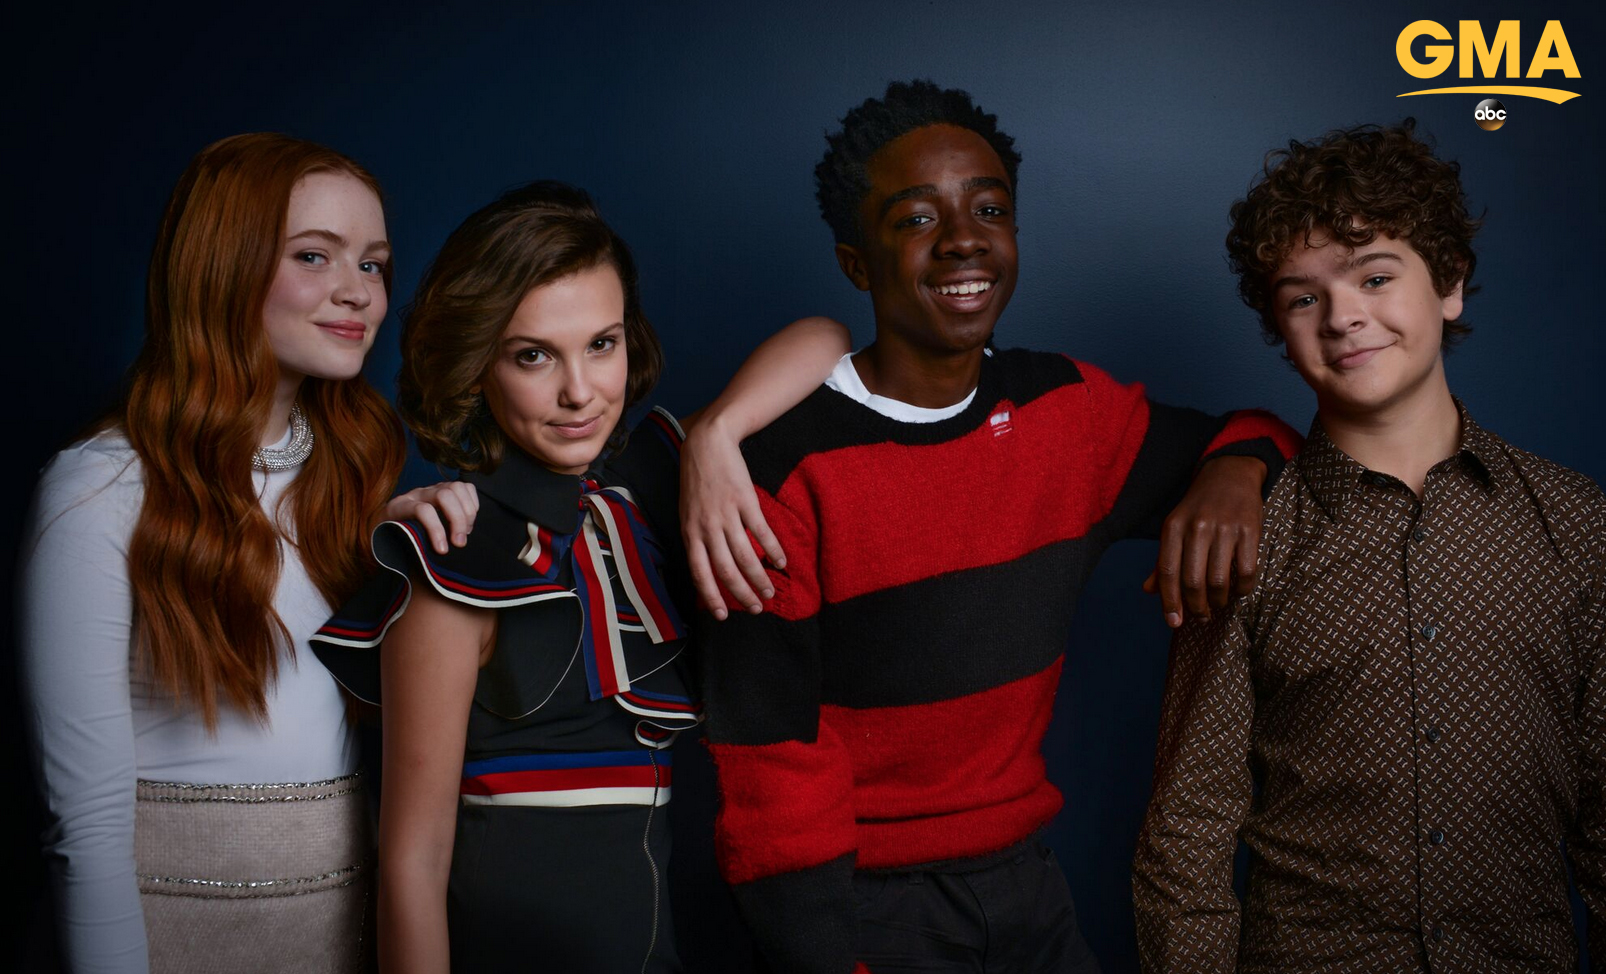 PHOTO: The cast of the hit Netflix show "Stranger Things" visited the "GMA" studio on Halloween 2017.